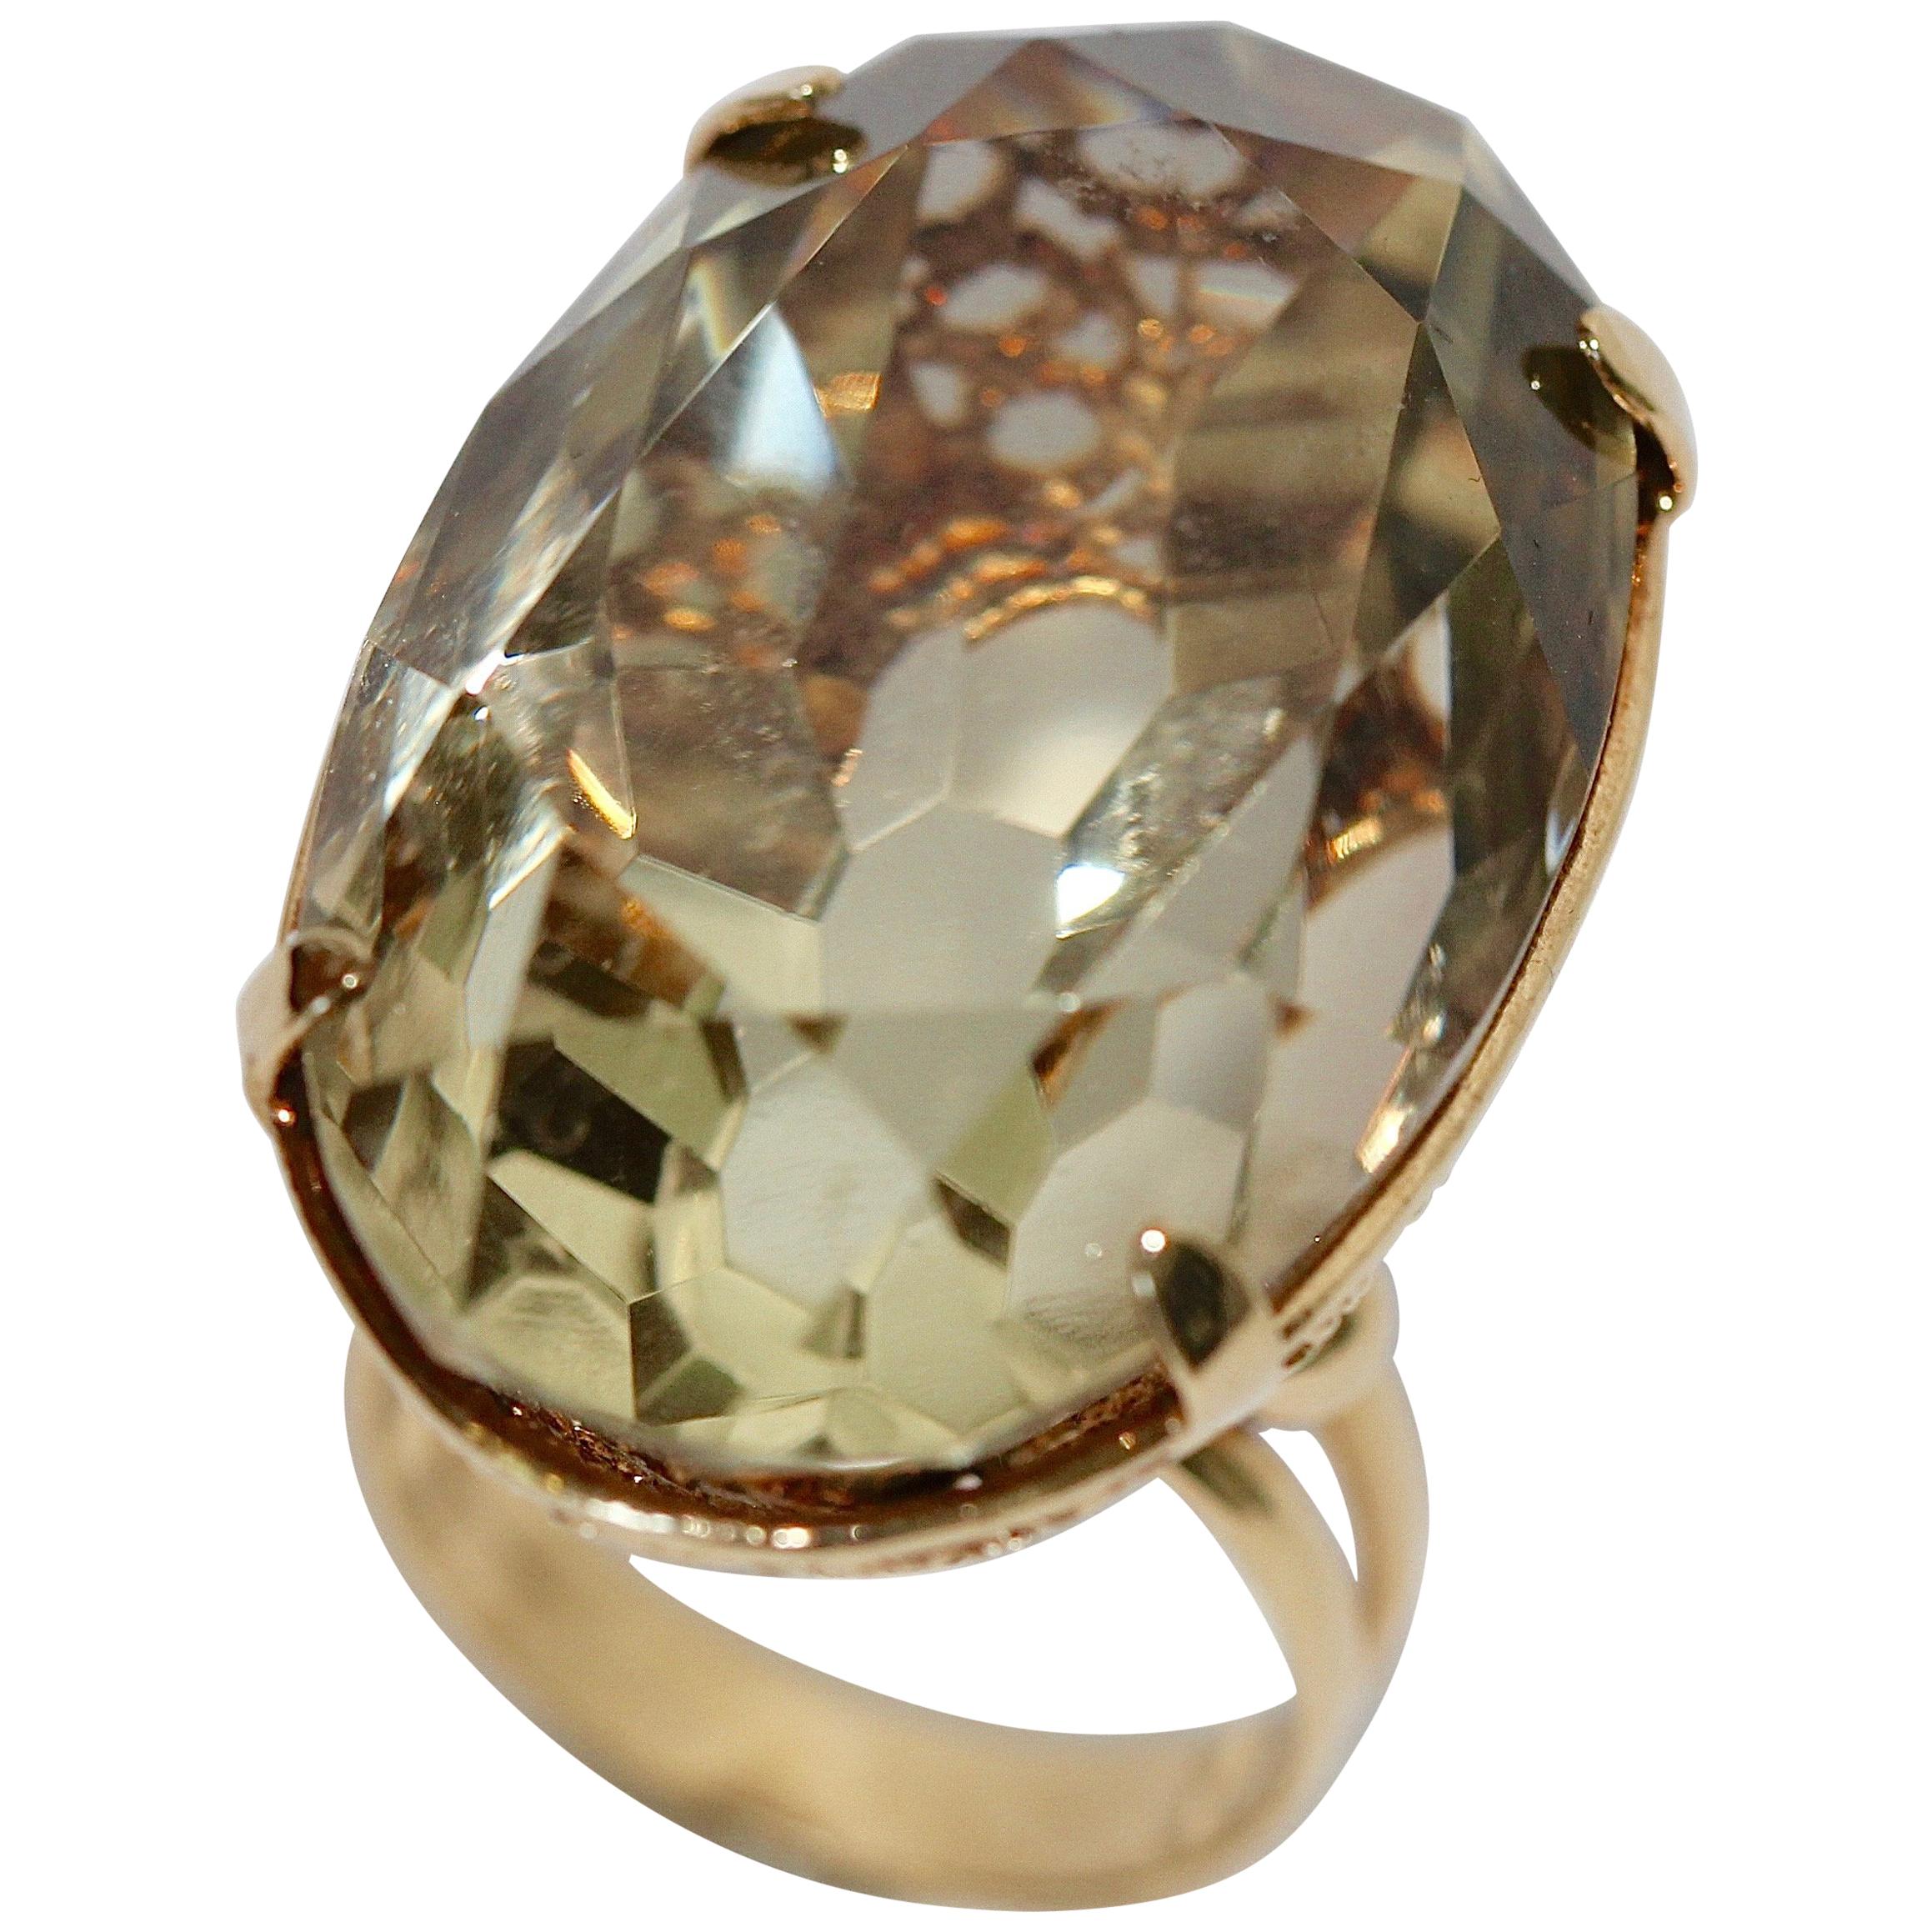 14 Karat Yellow Gold Ring with Large, Faceted, Bright Citrine